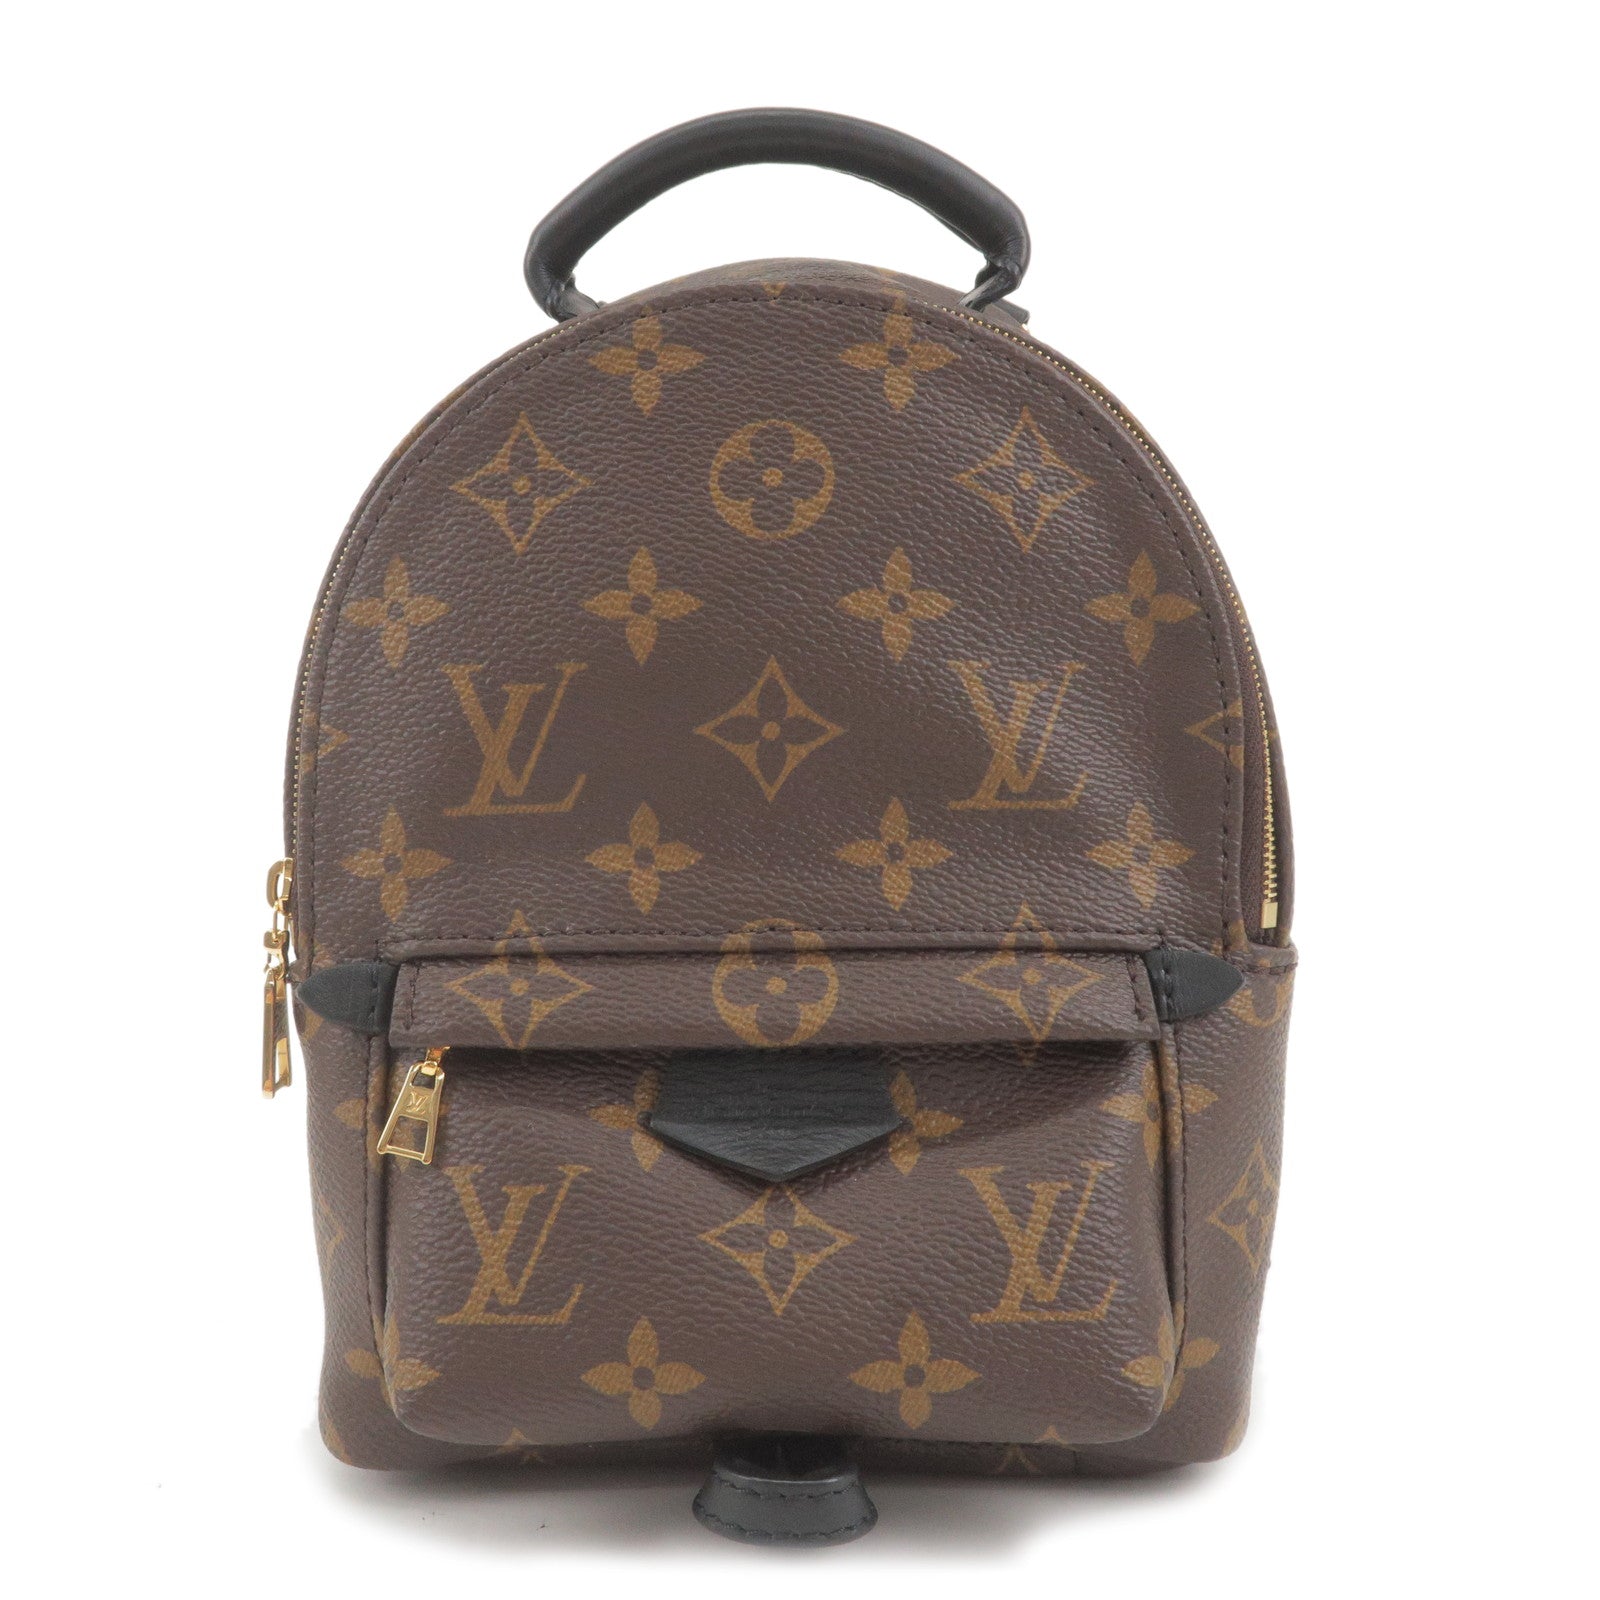 MINI - Pack - Back - Palm - Springs - Louis Vuitton Has Created